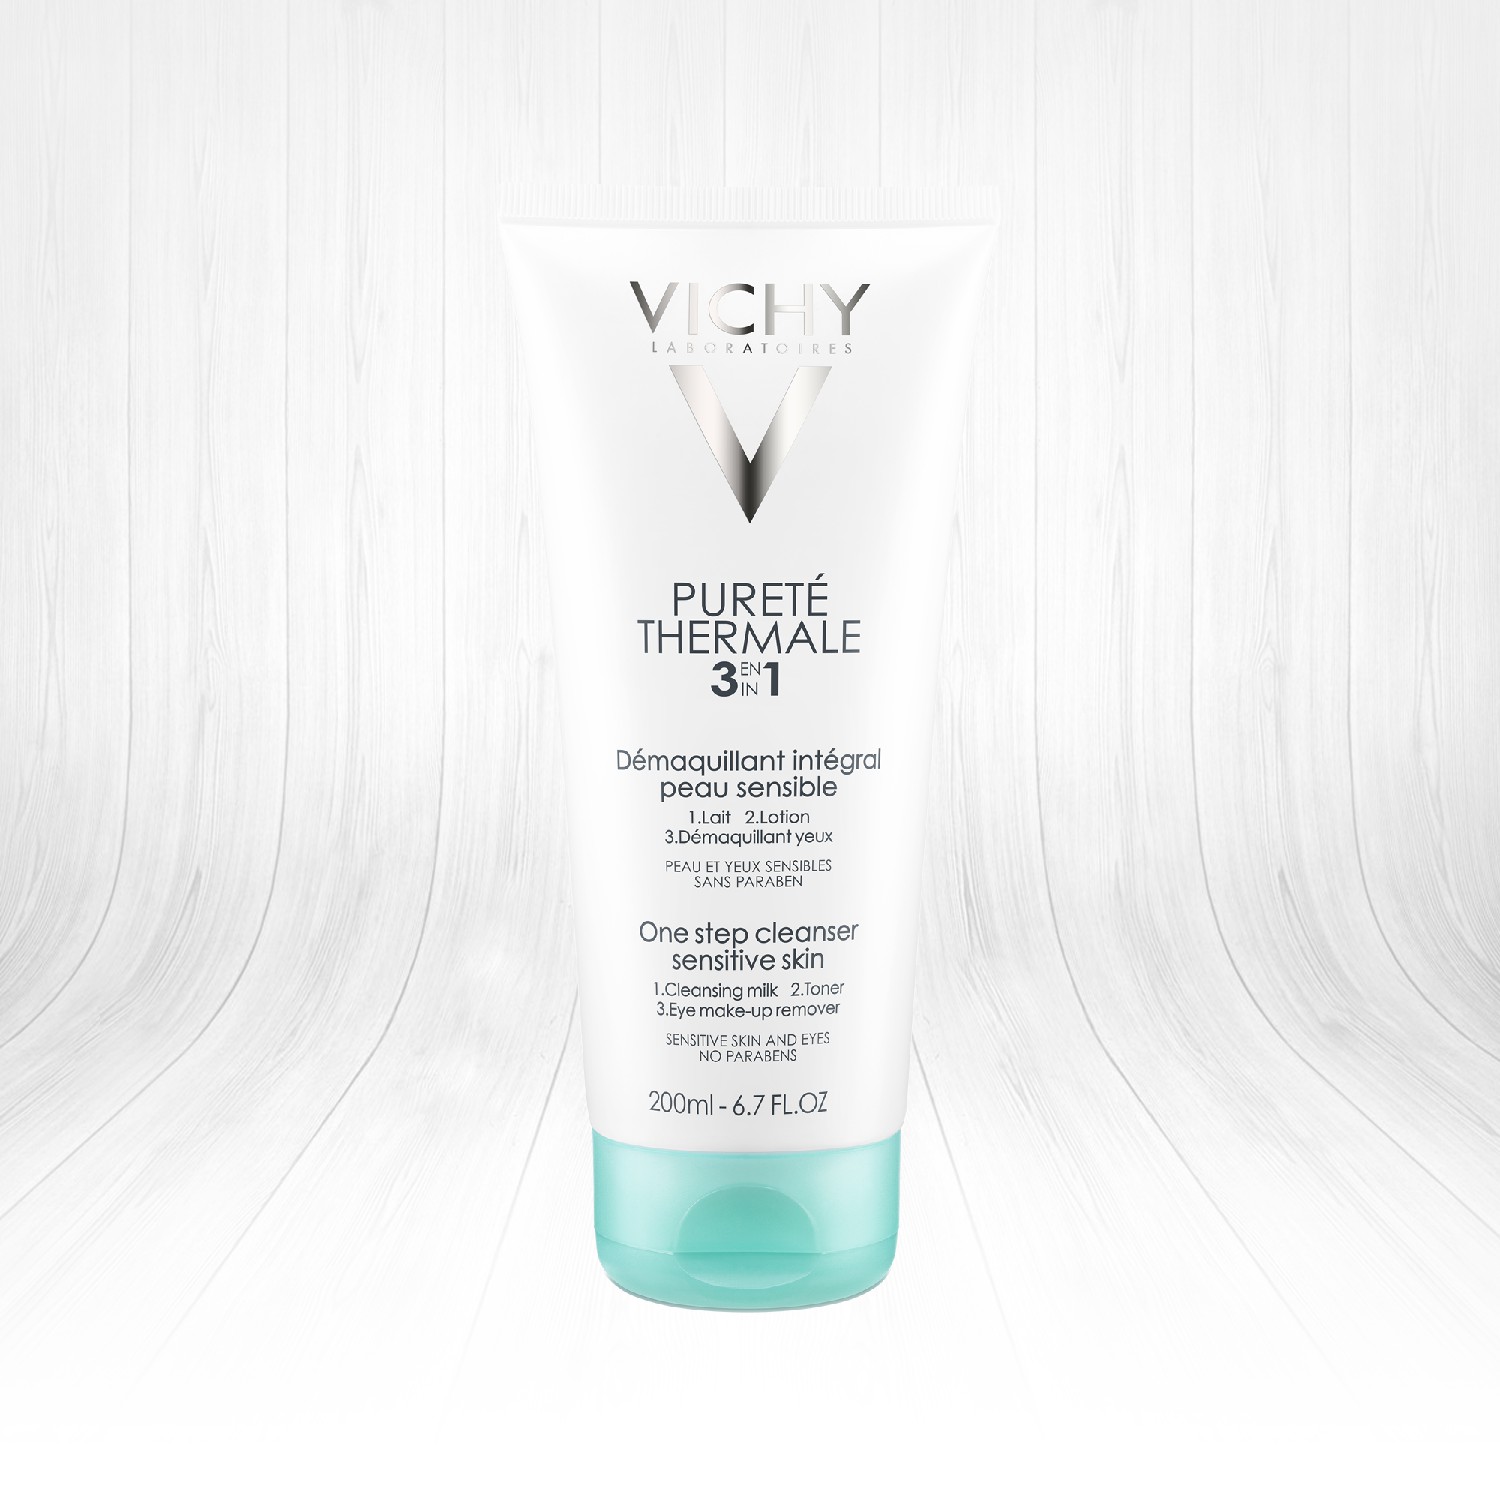 Vichy Purete Thermale in One Step Cleanser